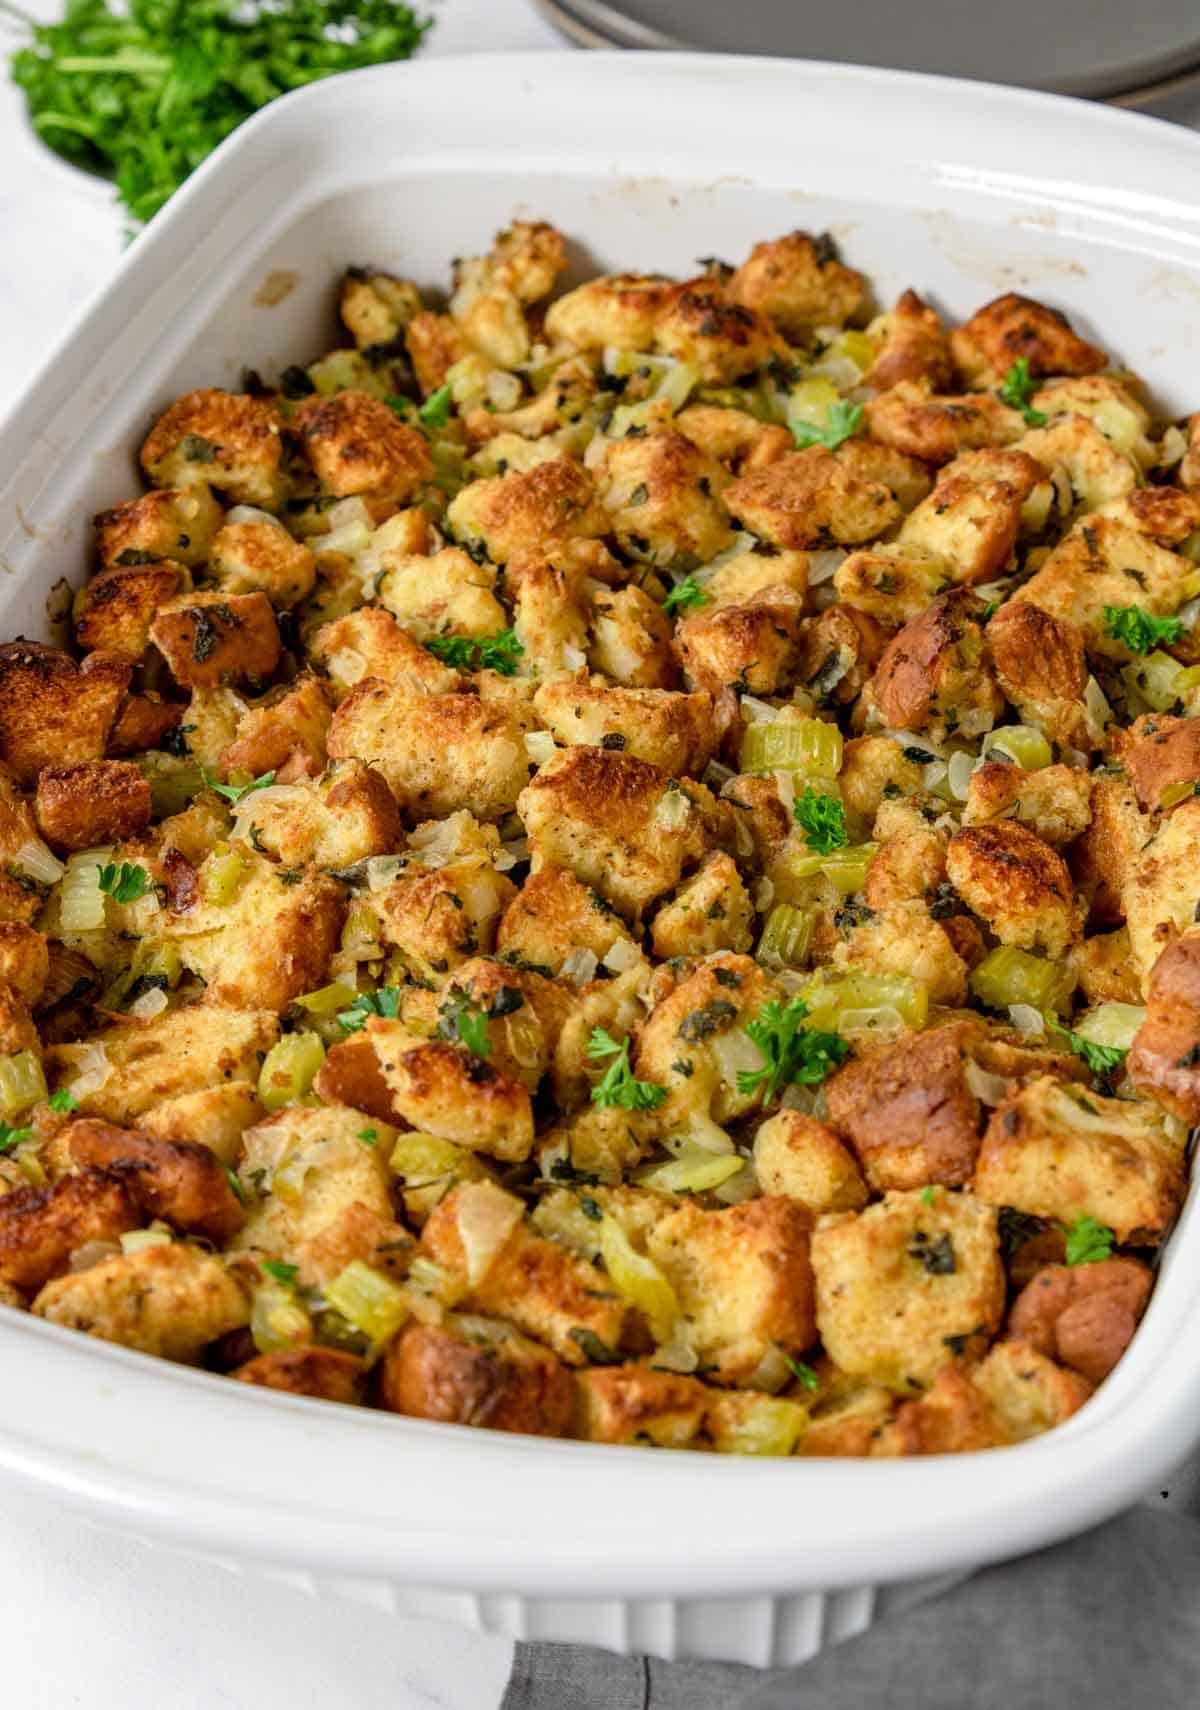 Homemade Stuffing | Traditional bread stuffing recipe - Mom's Dinner